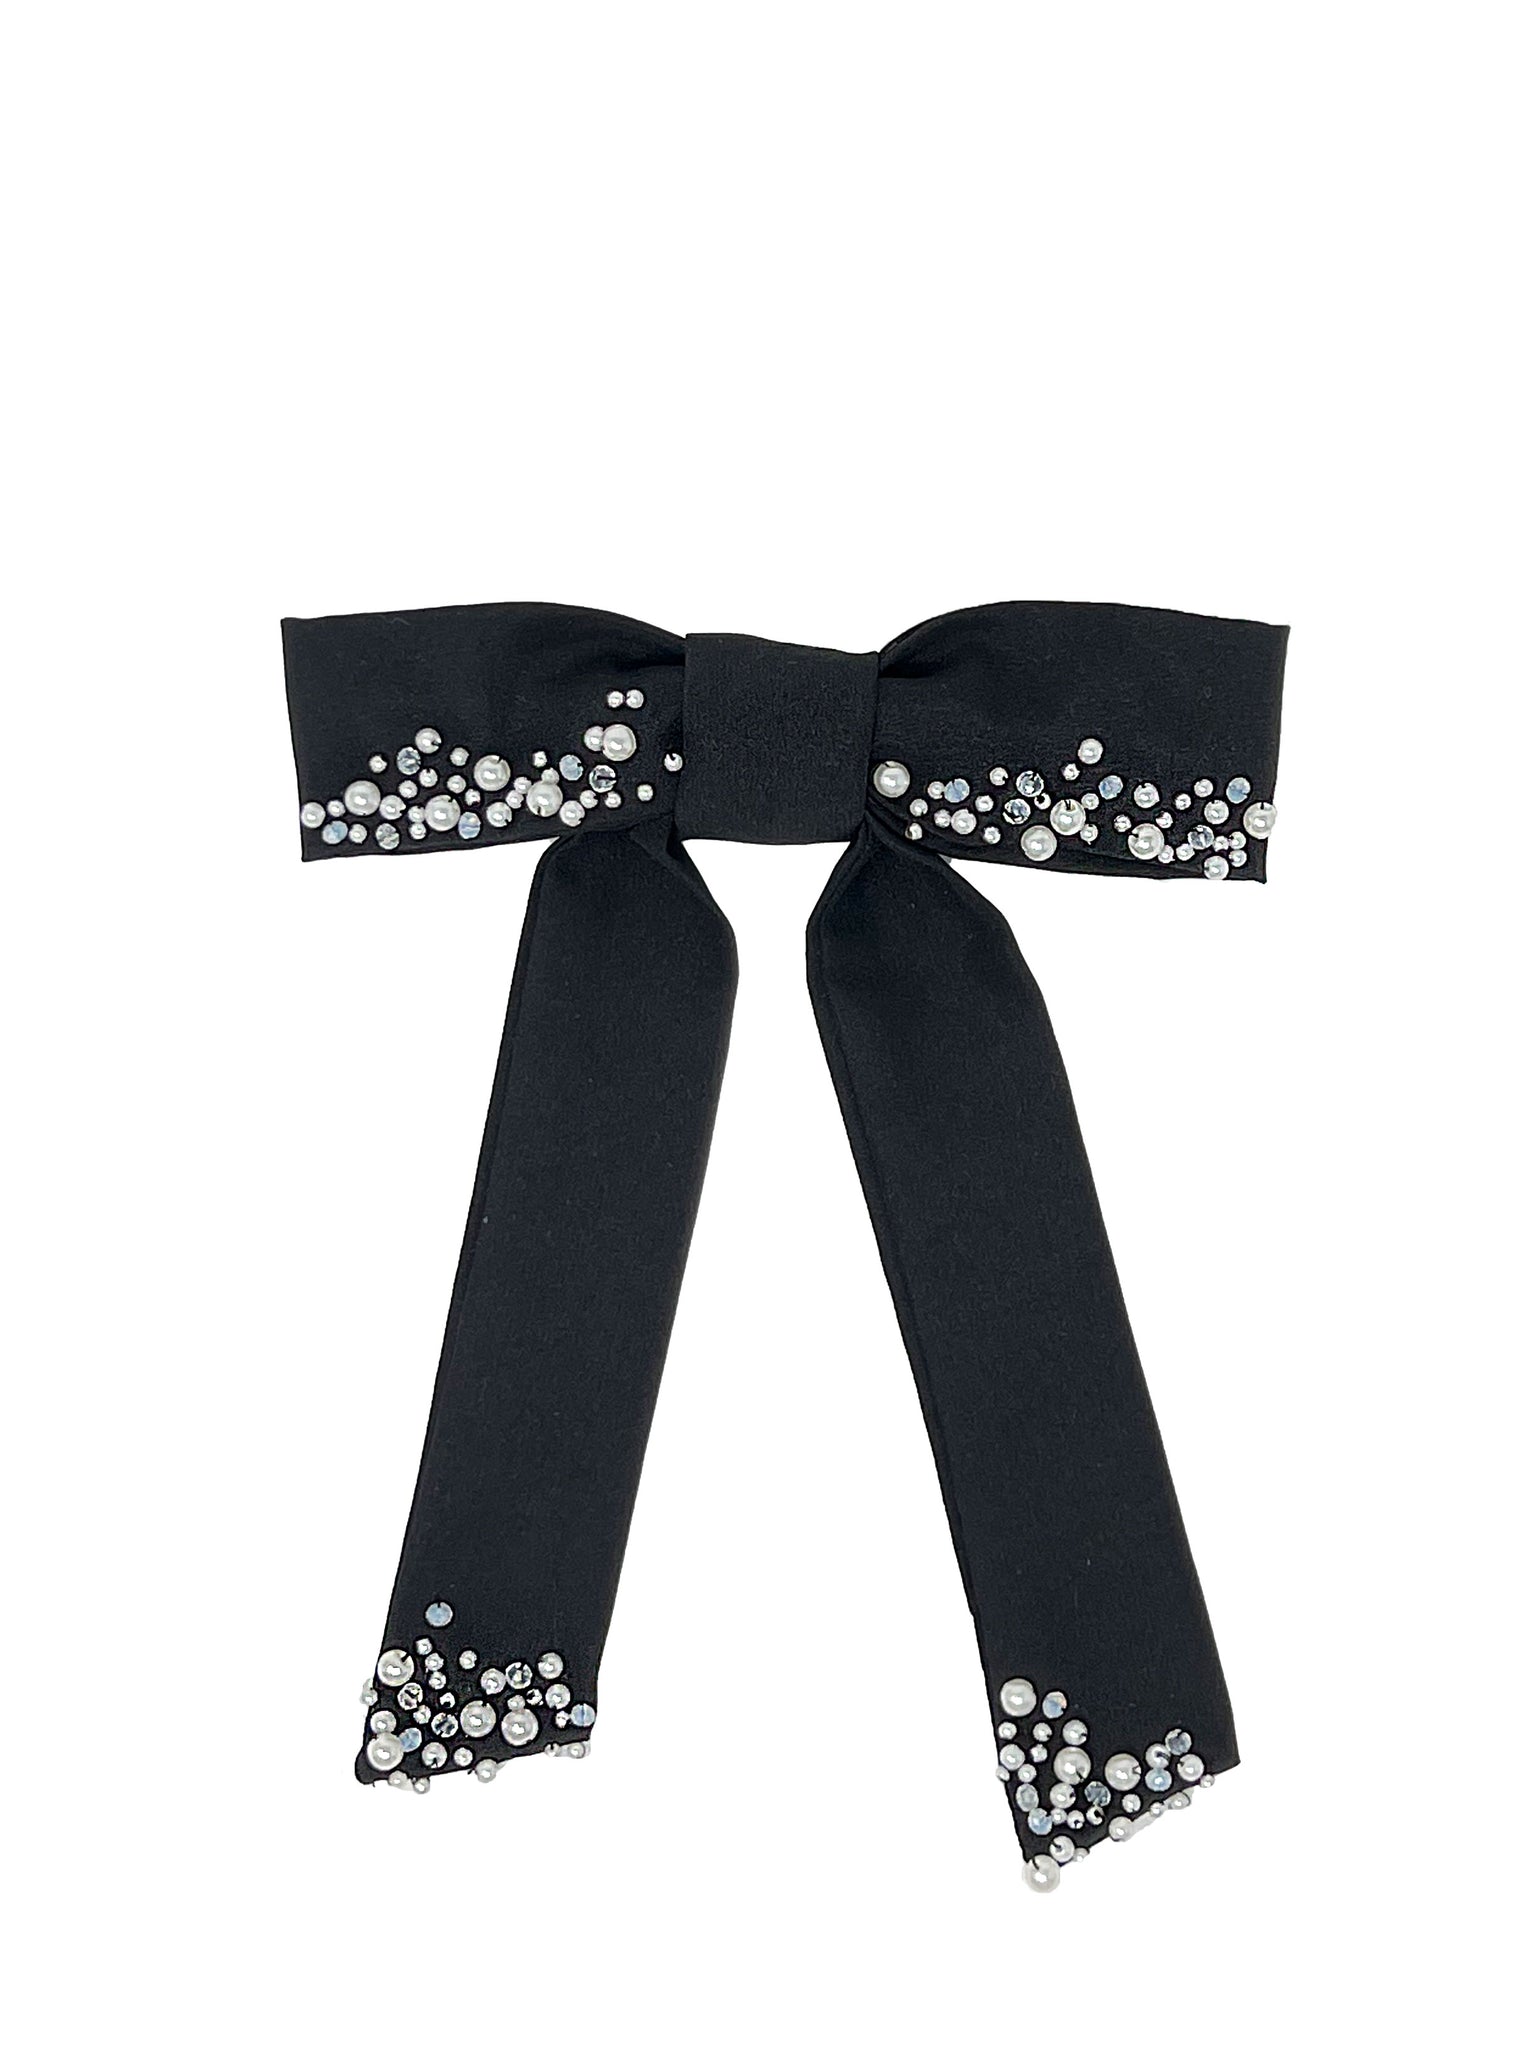 Black satin bow barrette with crystals